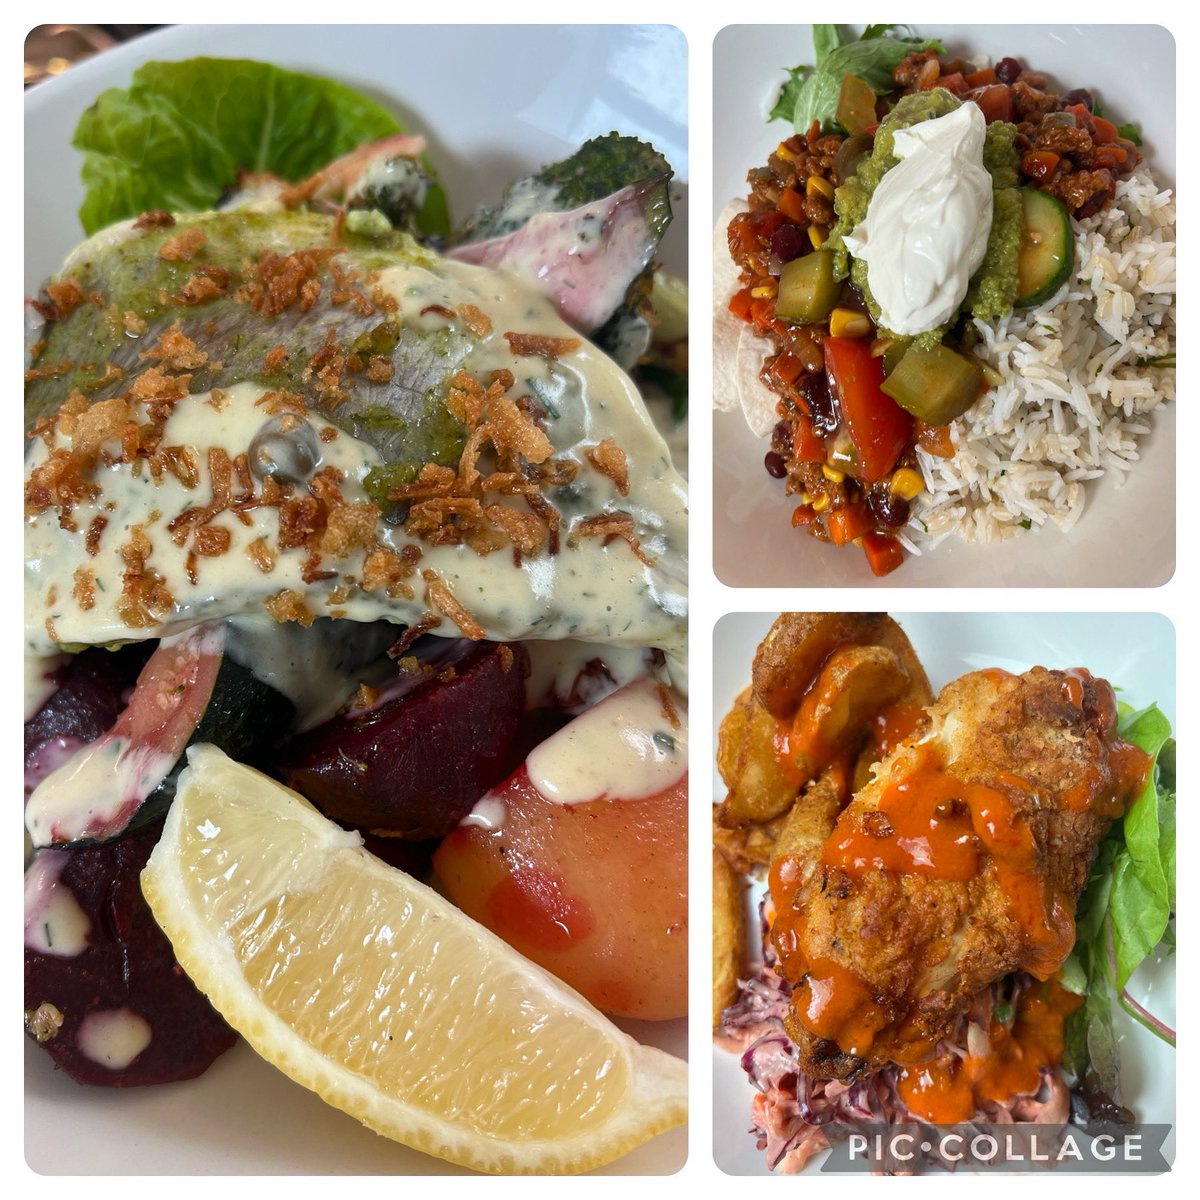 New dishes on today’s menu in the EDUkitchen! We are serving: -Sea Bream, Roasted Potatoes and Beetroot & Caper Sauce -Buttermilk Fried Chicken, Potato Wedges & Slaw -Quorn Burrito Bowl, Guacamole, Sour Cream & Rice @LoveBritishFood #greathospitalfood